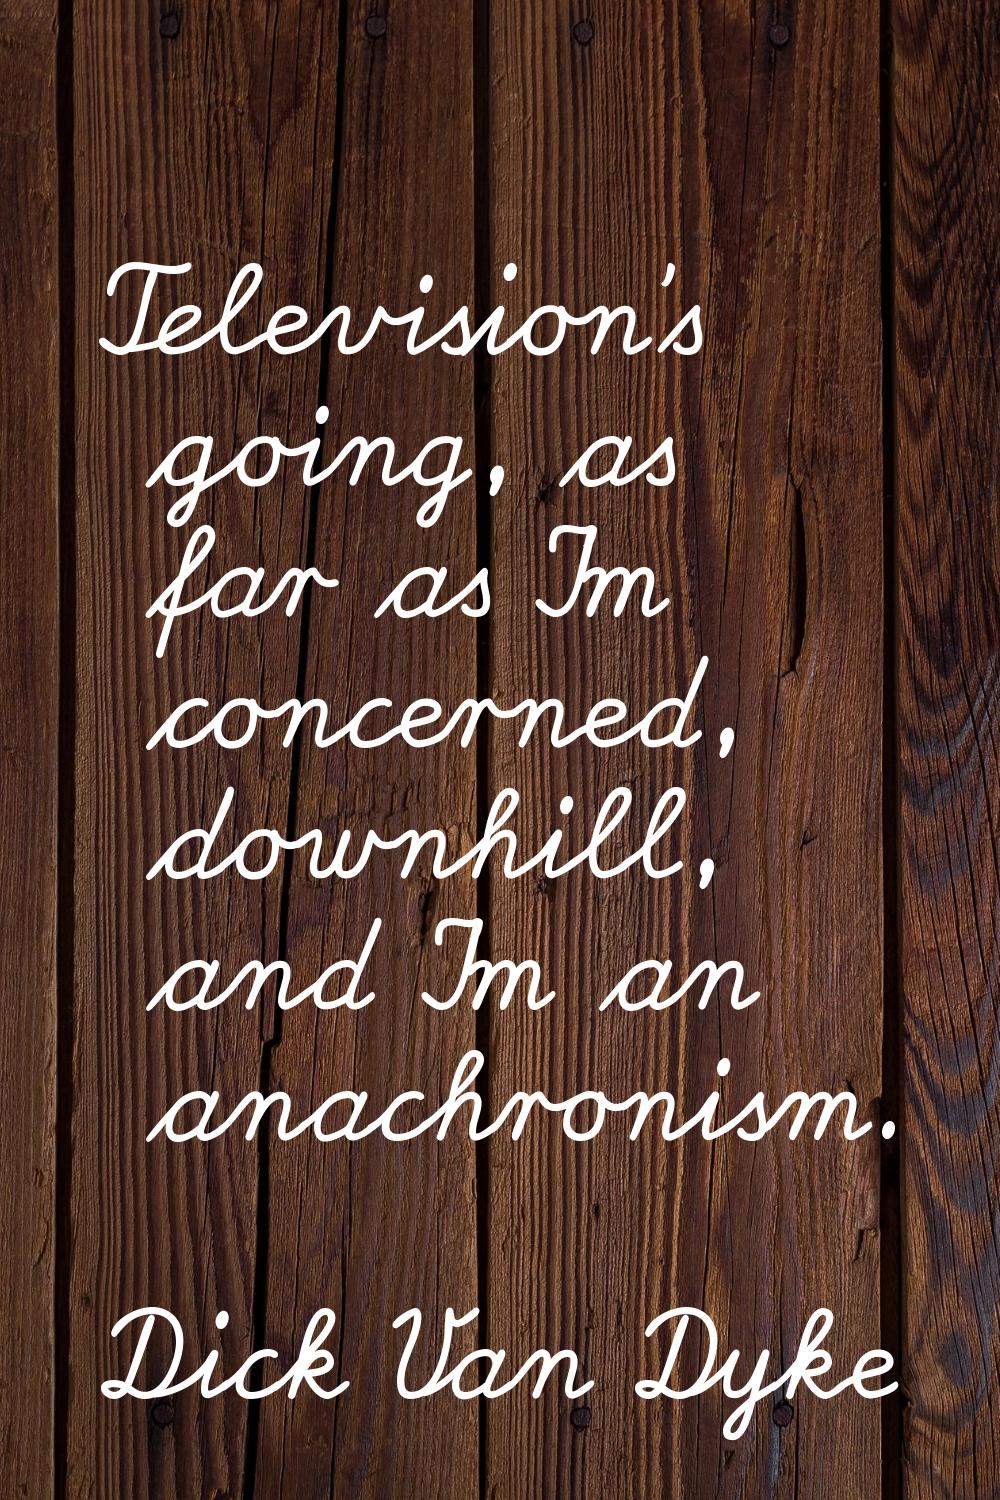 Television's going, as far as I'm concerned, downhill, and I'm an anachronism.